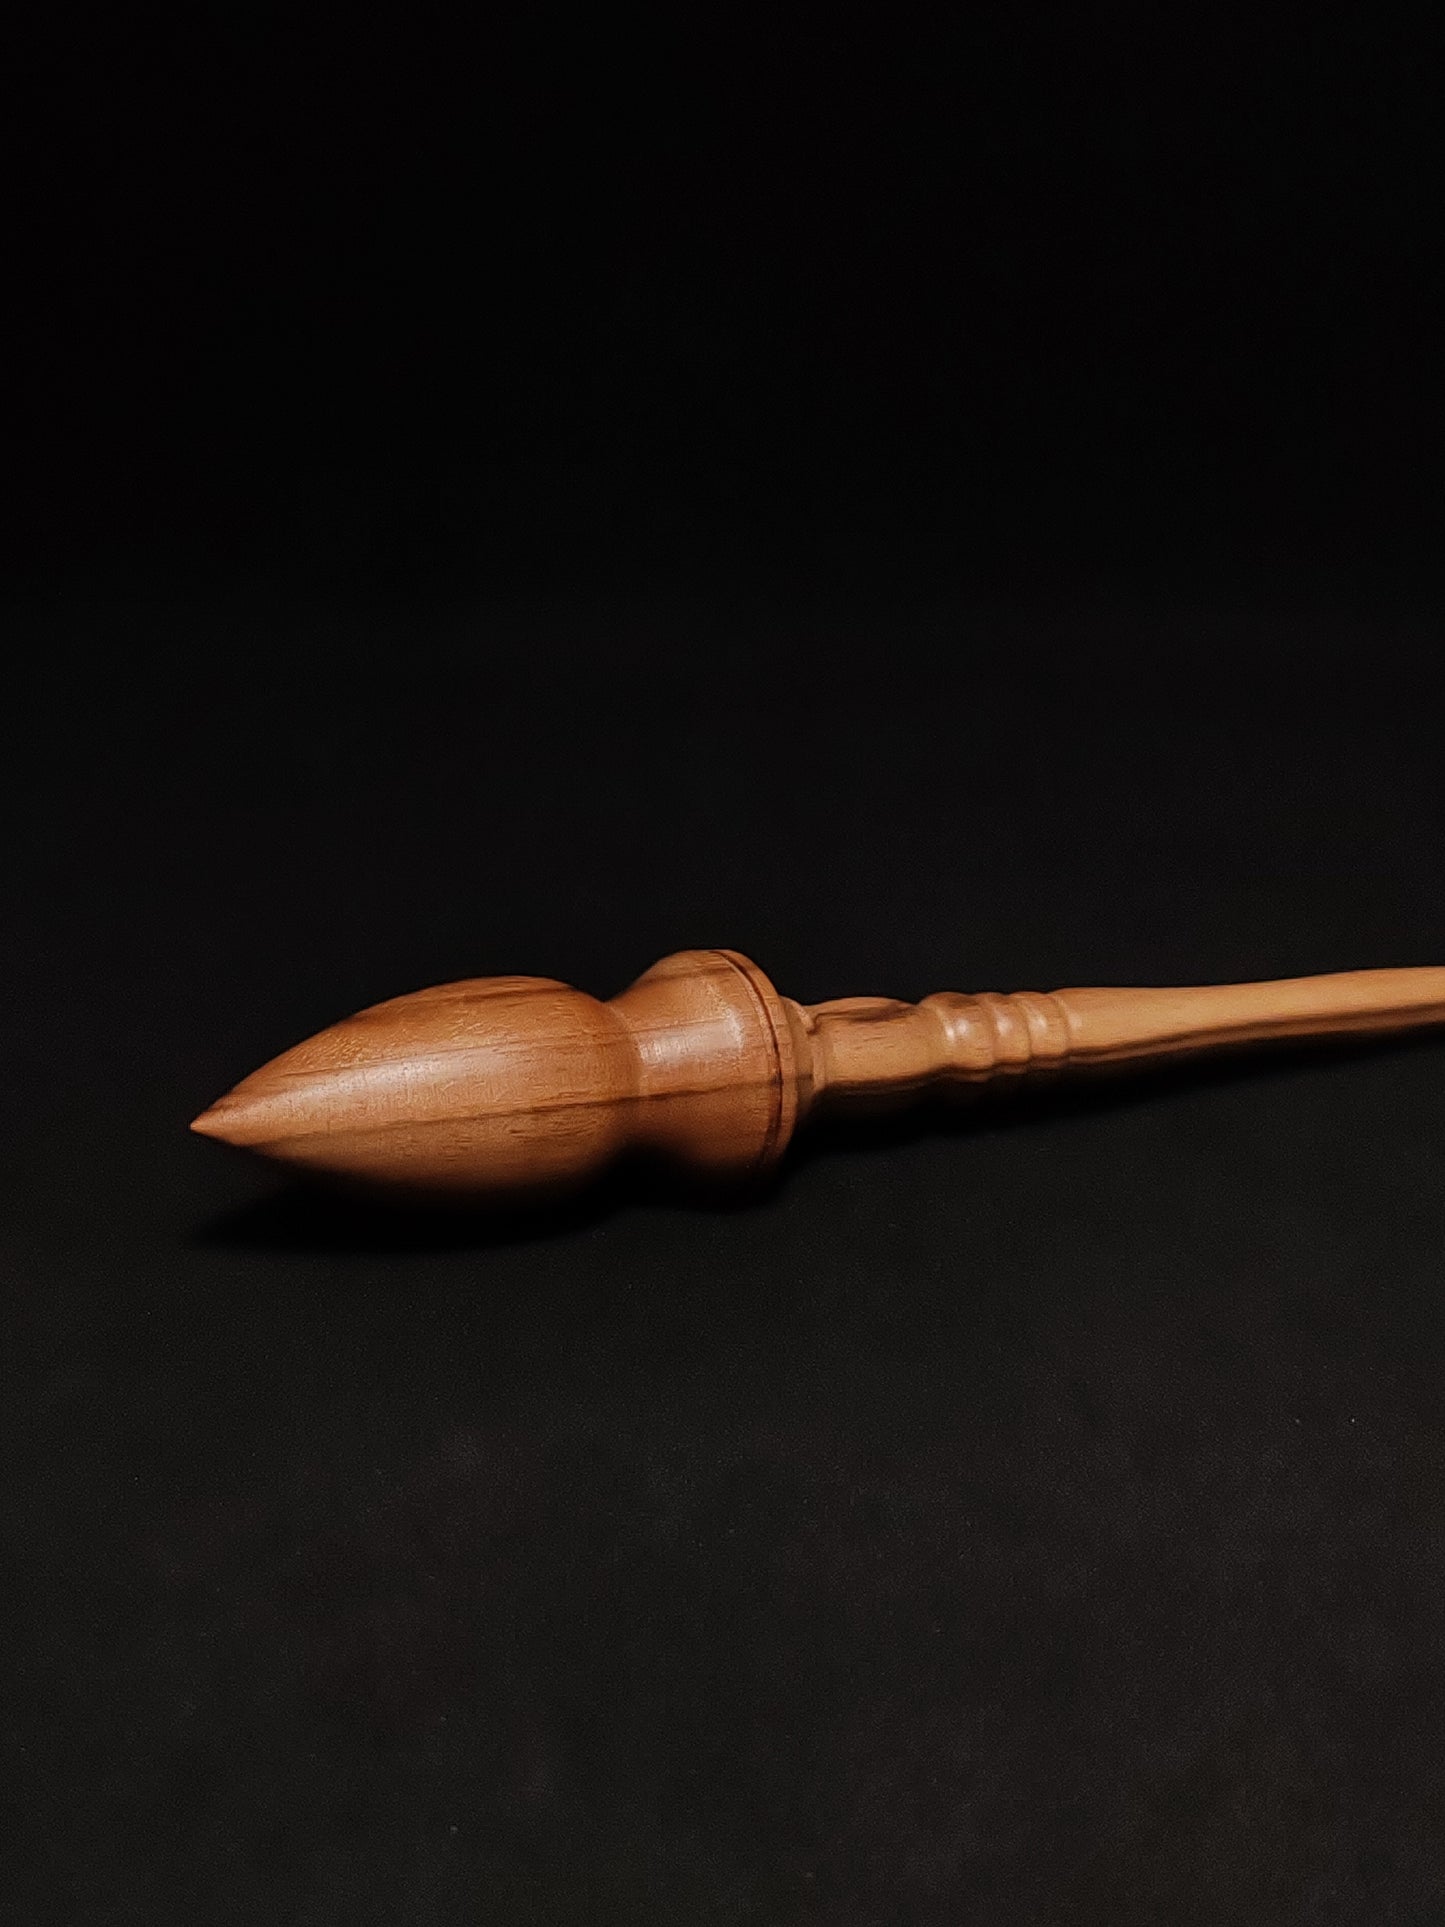 Support Spindle: Walnut (26.5 cm / 10.43 inches, 30 g / 1.06 oz)